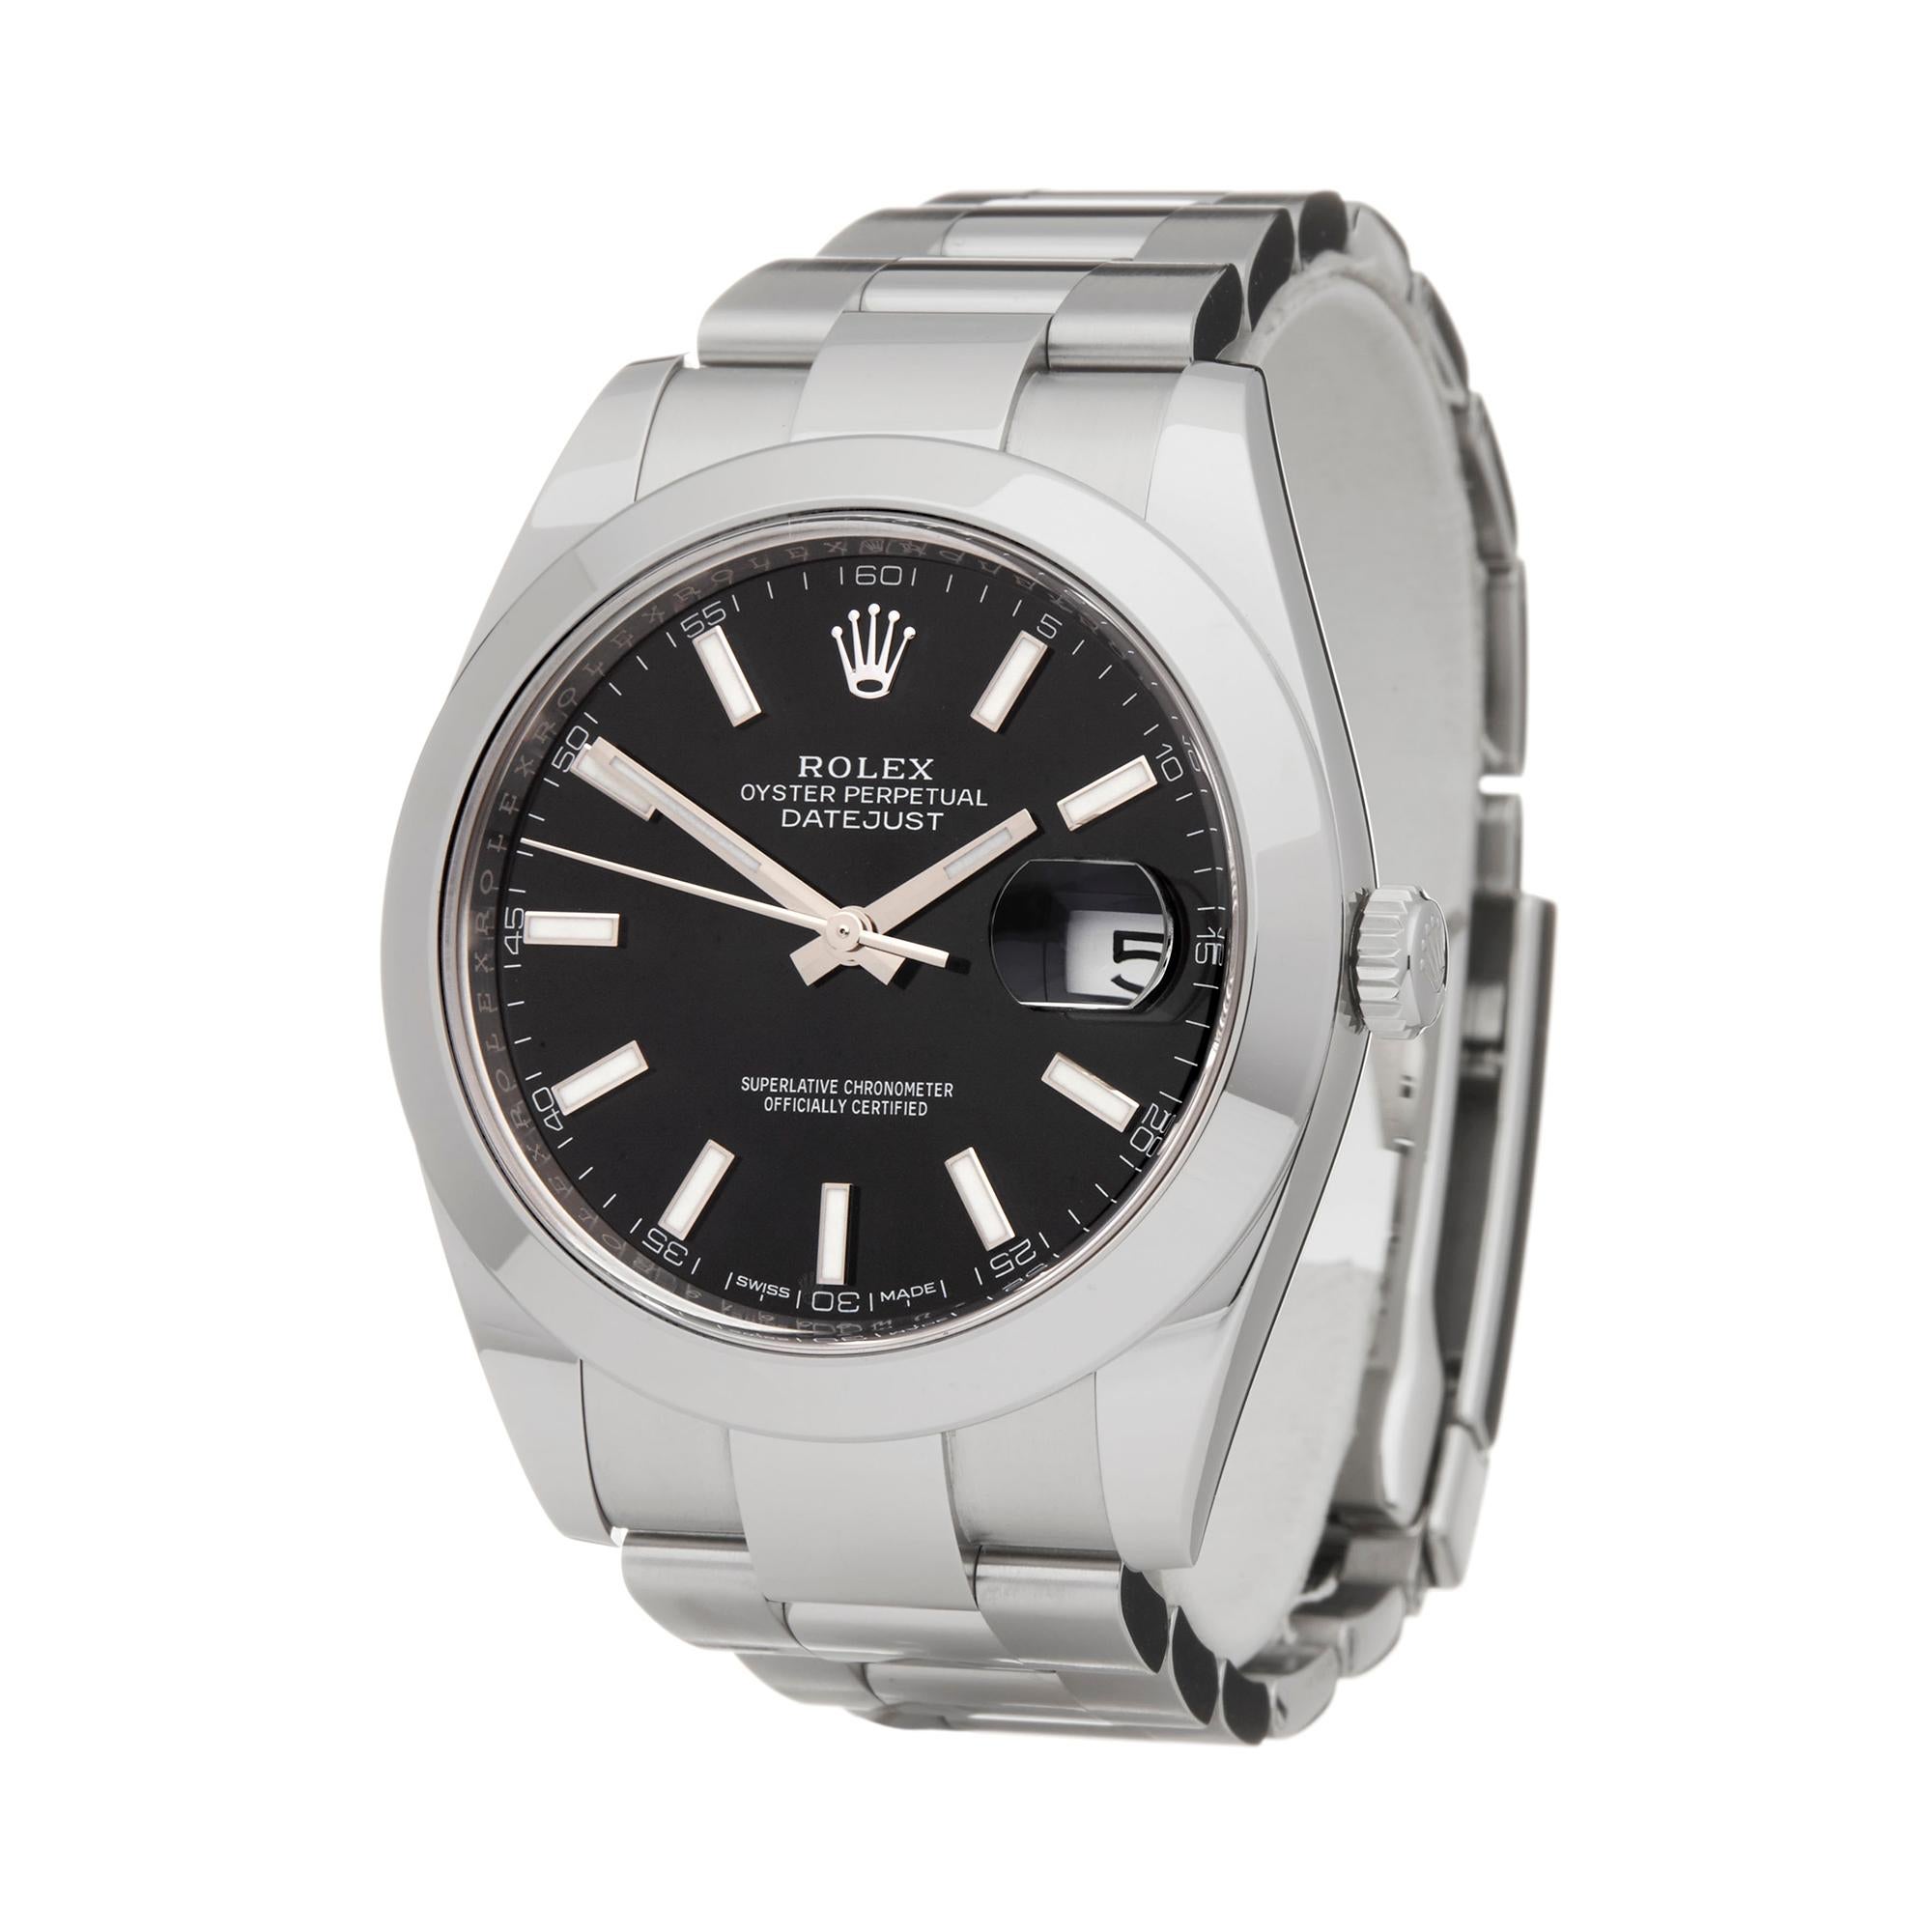 Ref: COM2244
Manufacturer: Rolex
Model: Datejust II
Model Ref: 126300
Age: 24th February 2018
Gender: Mens
Complete With: Box, Manuals, Guarantee, Card Holder, Bezel Guard & Swing Tags
Dial: Black Baton
Glass: Sapphire Crystal
Movement: